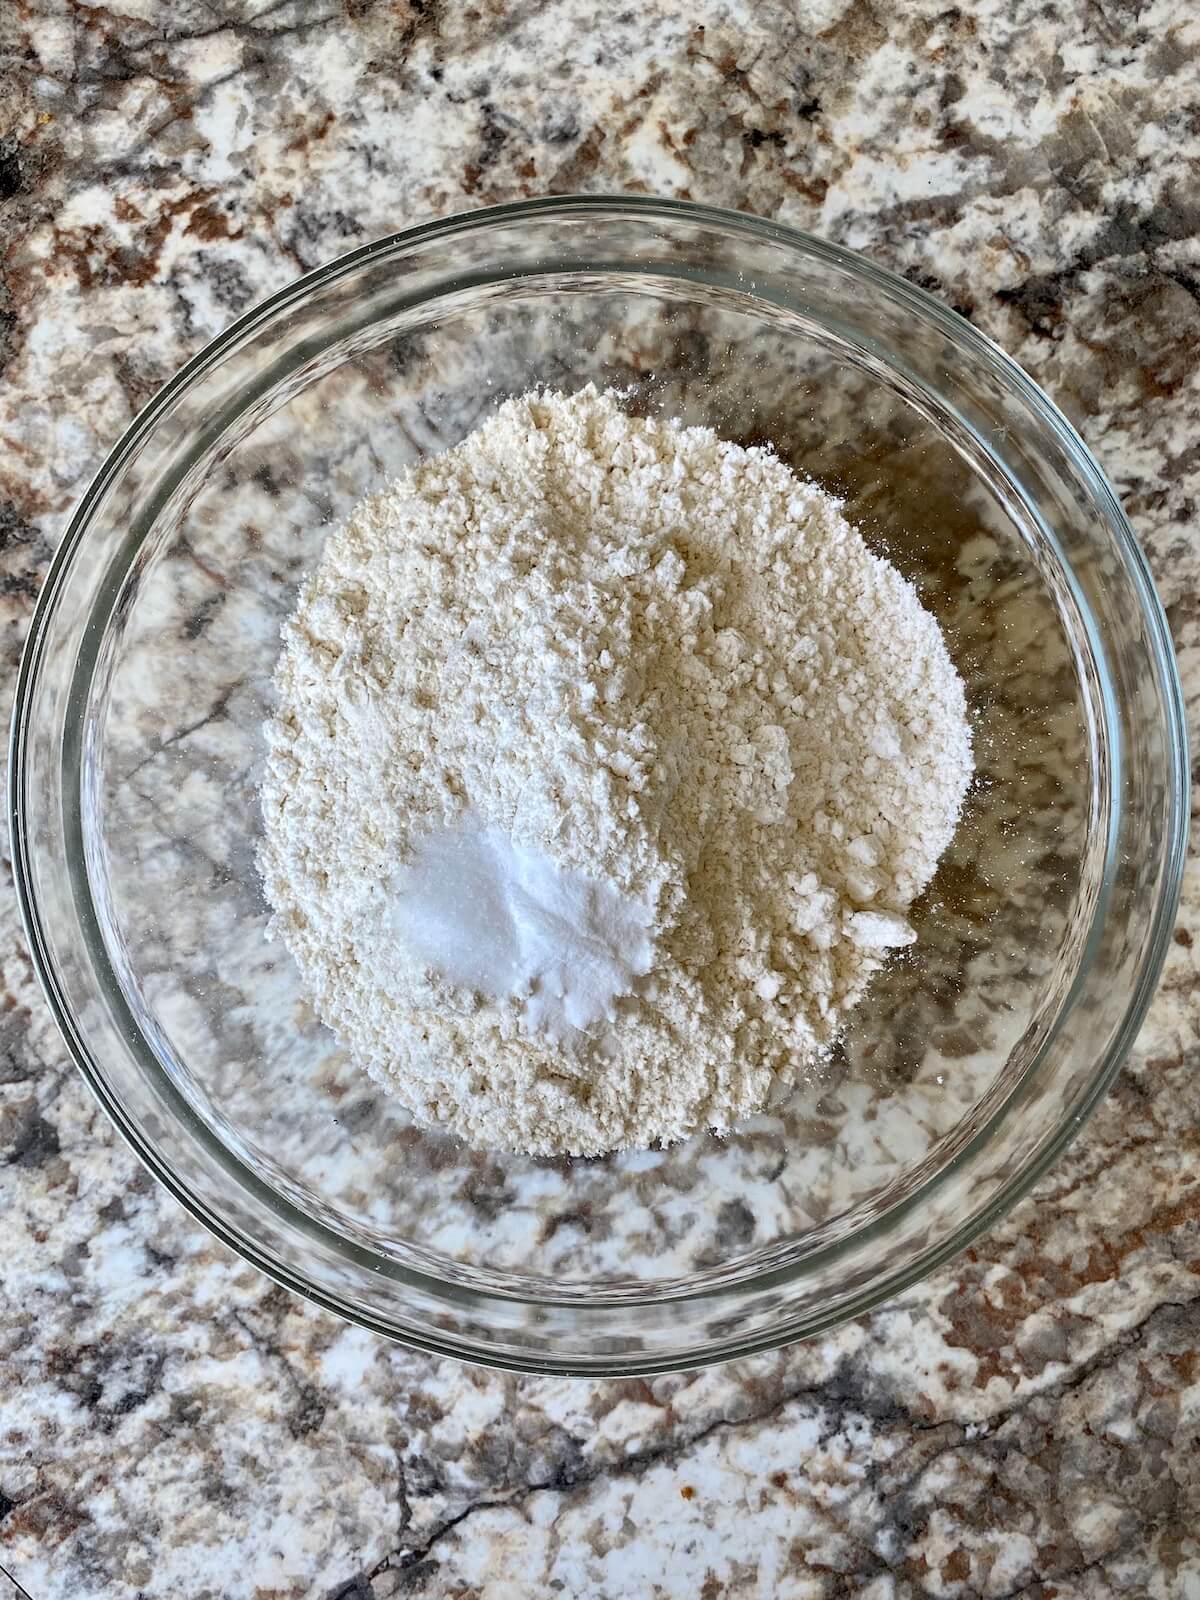 Flour, baking soda, and salt in a clear glass mixing bowl.